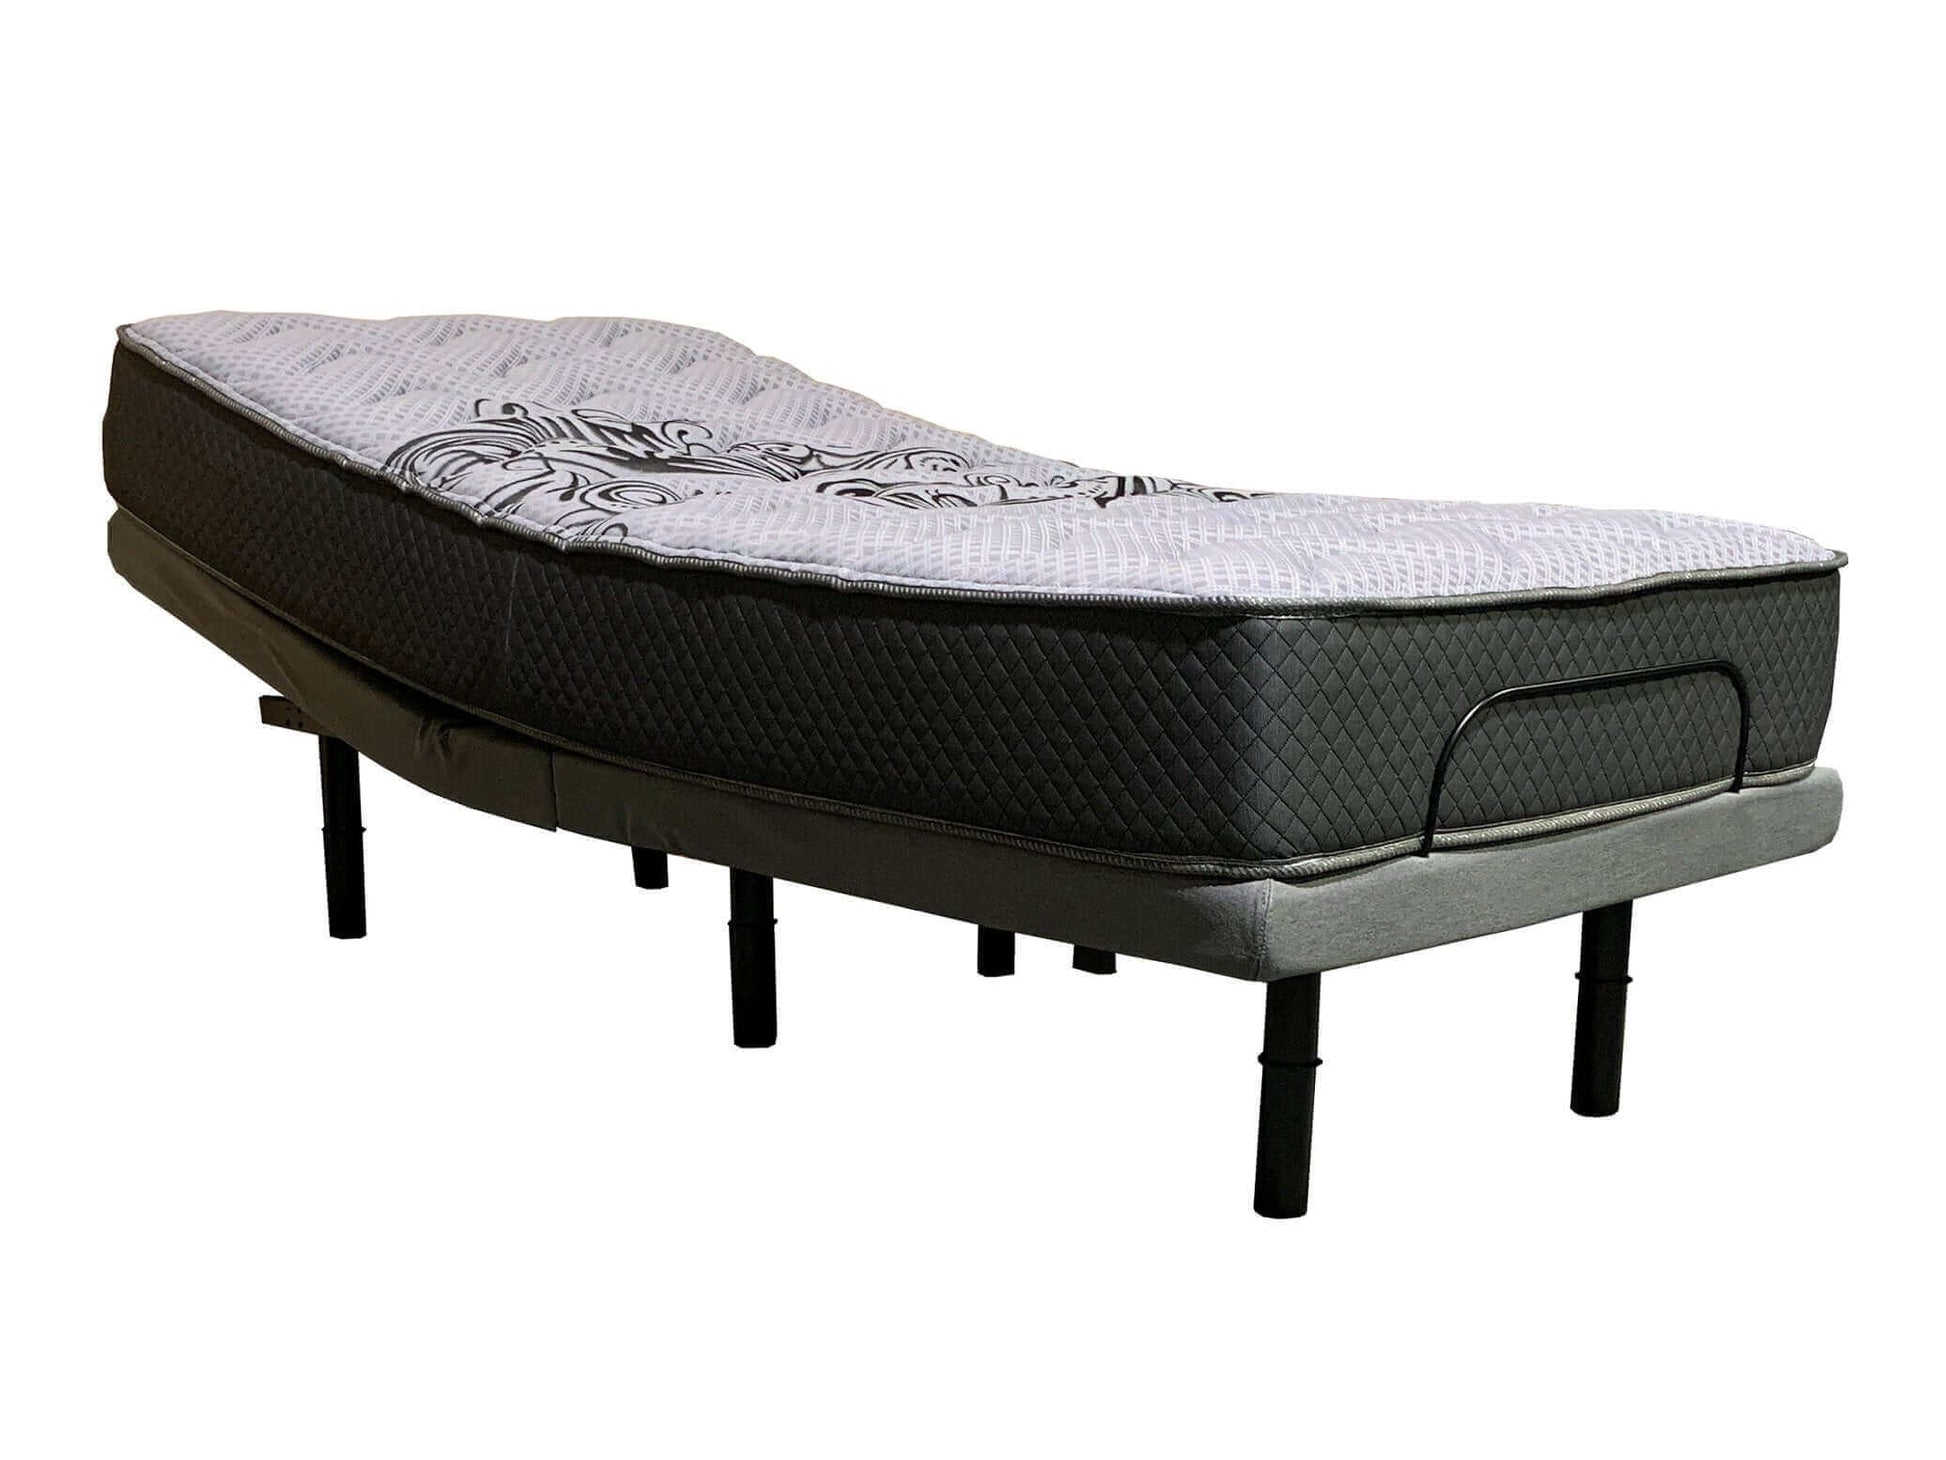 International Furniture Distribution Centre - Deluxe Model Adjustable Electric Bed - IF-3610-Accord 39"-XL